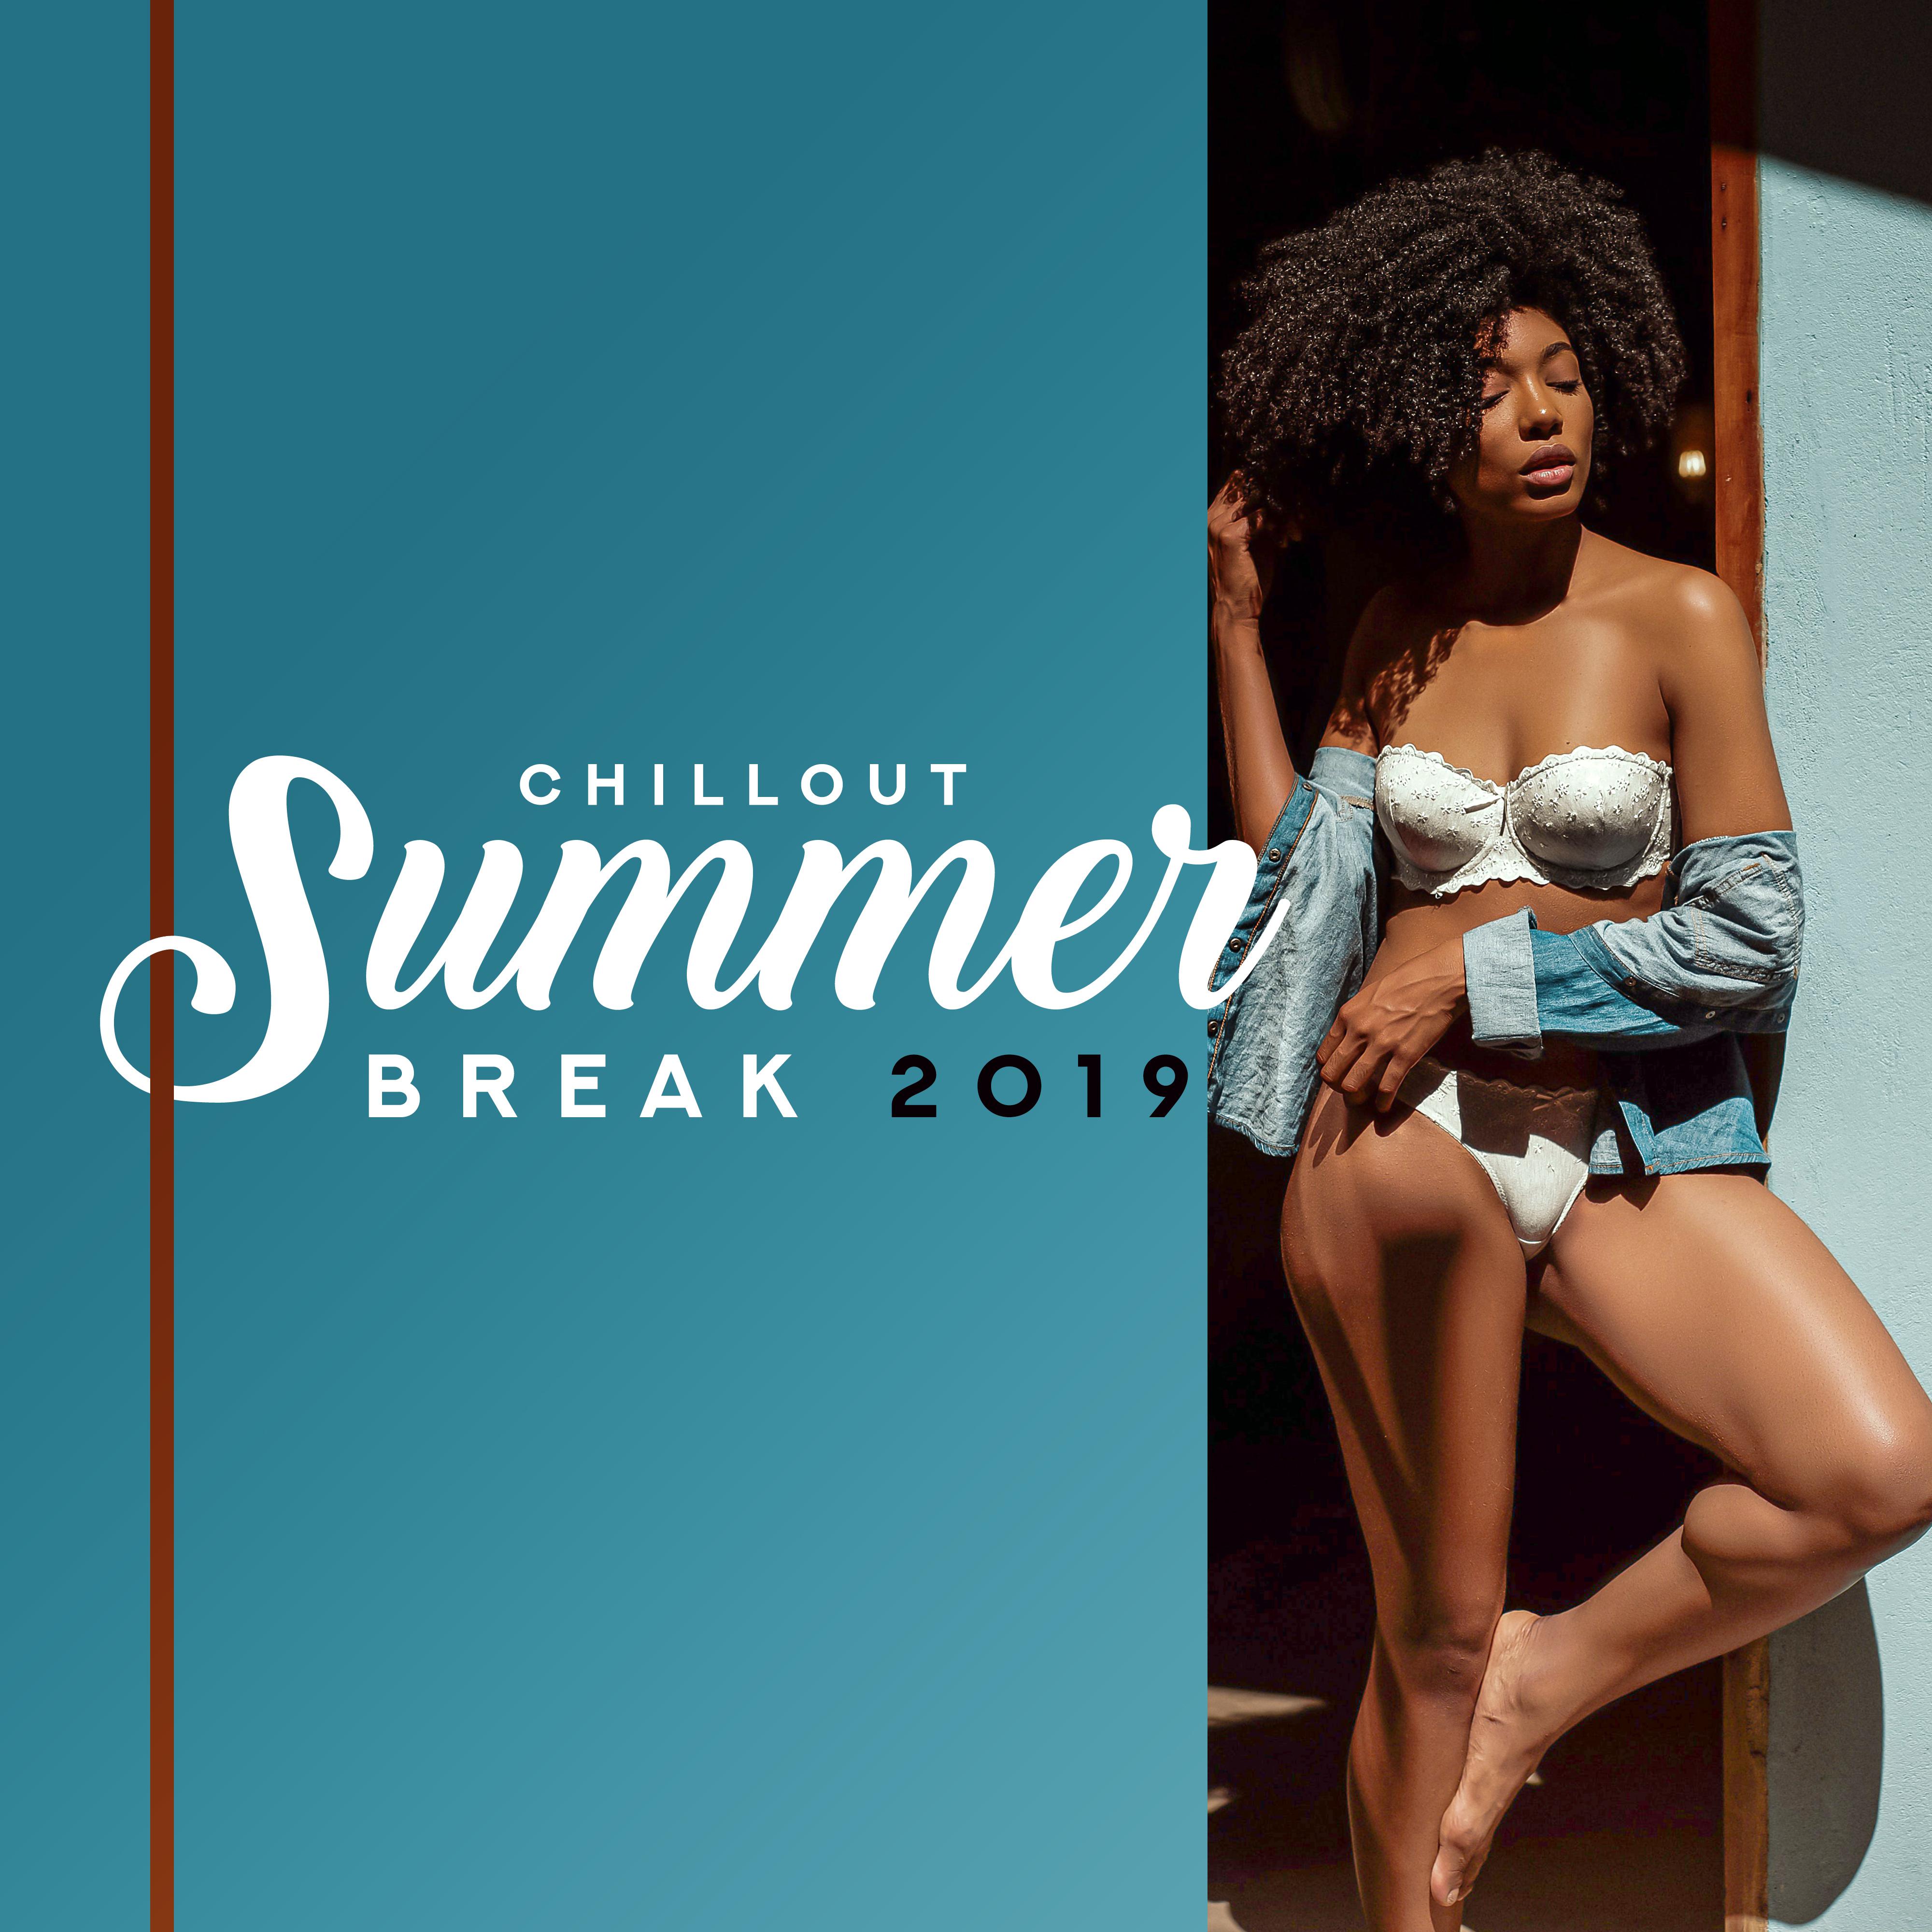 Chillout Summer Break 2019 – Best Chill Out Vacation Music Mix, Songs Perfect for Relaxing on the Beach, Sunbathing, Calm Down & Rest on Summer Holiday with Family & Friends